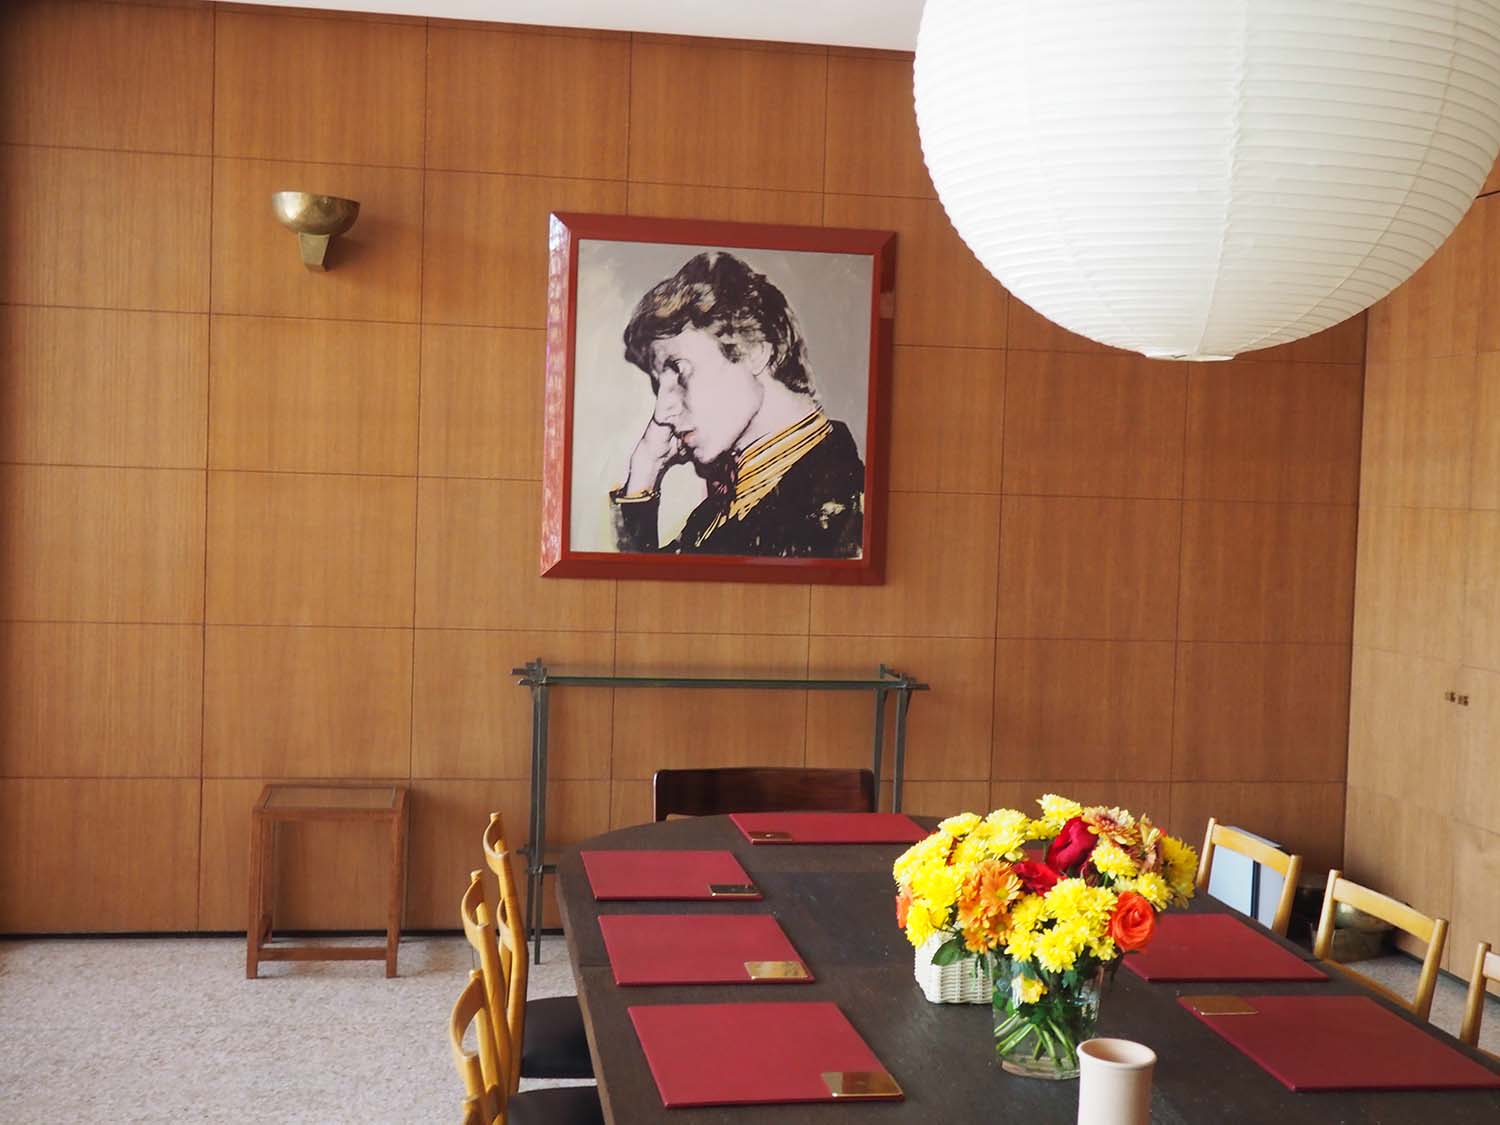 View of meeting room; portrait of Yves Saint Laurent by Andy Warhol on wall